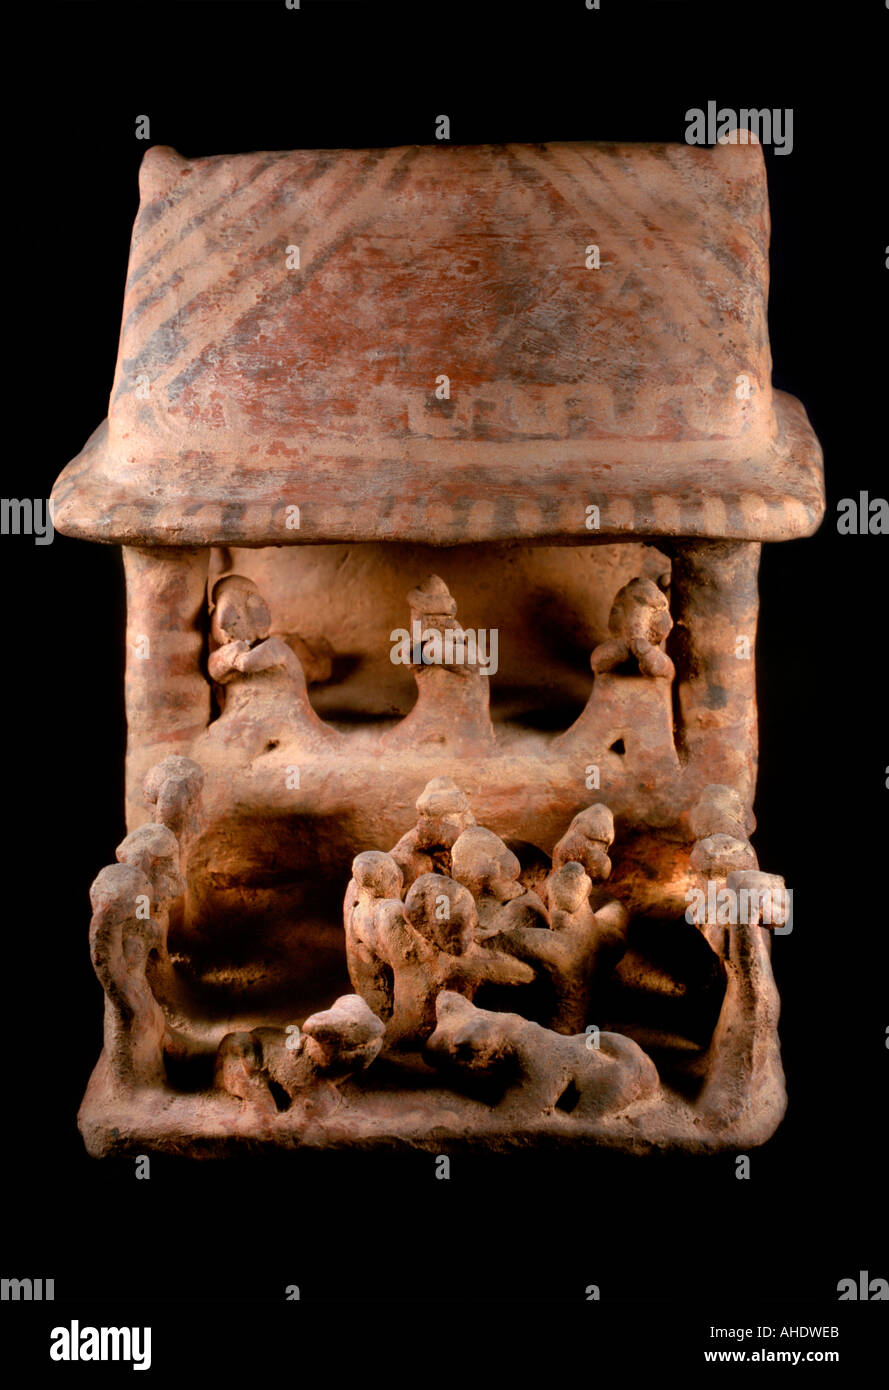 West Mexico cerammic artifact showing a village scene Stock Photo